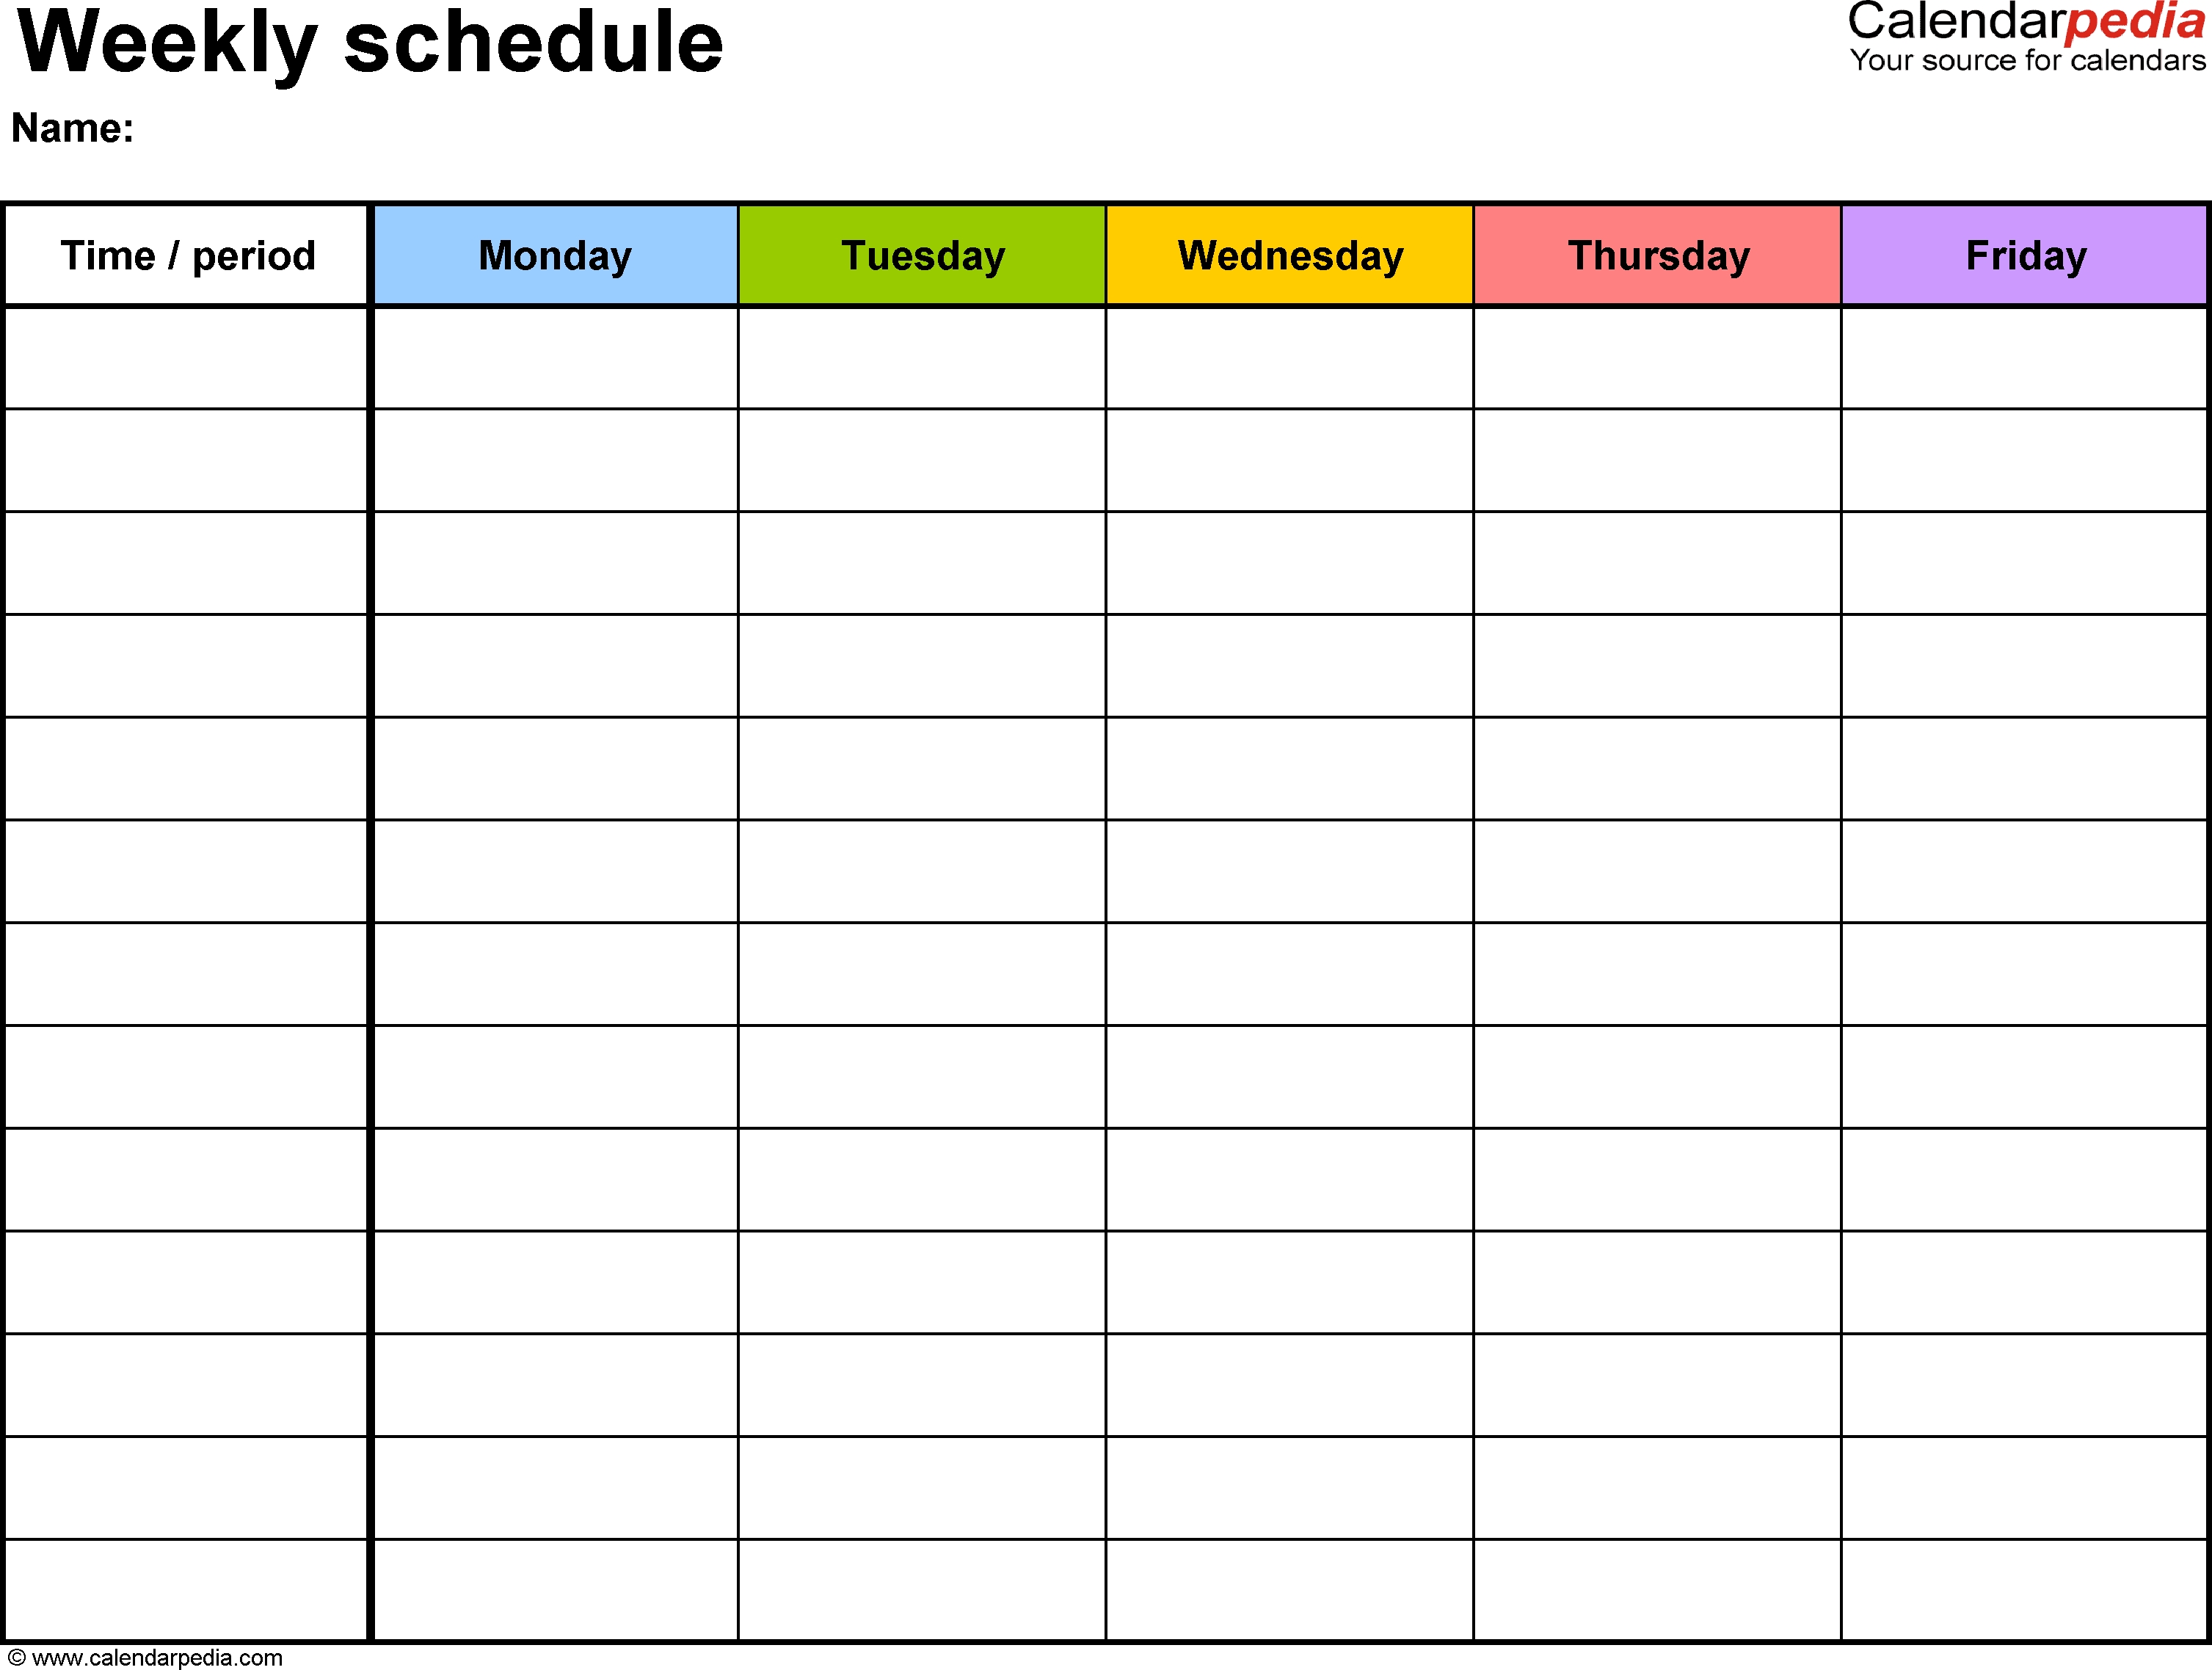 Free Weekly Schedule Templates For Word - 18 Templates-Summer Camp Calendar Template Blank